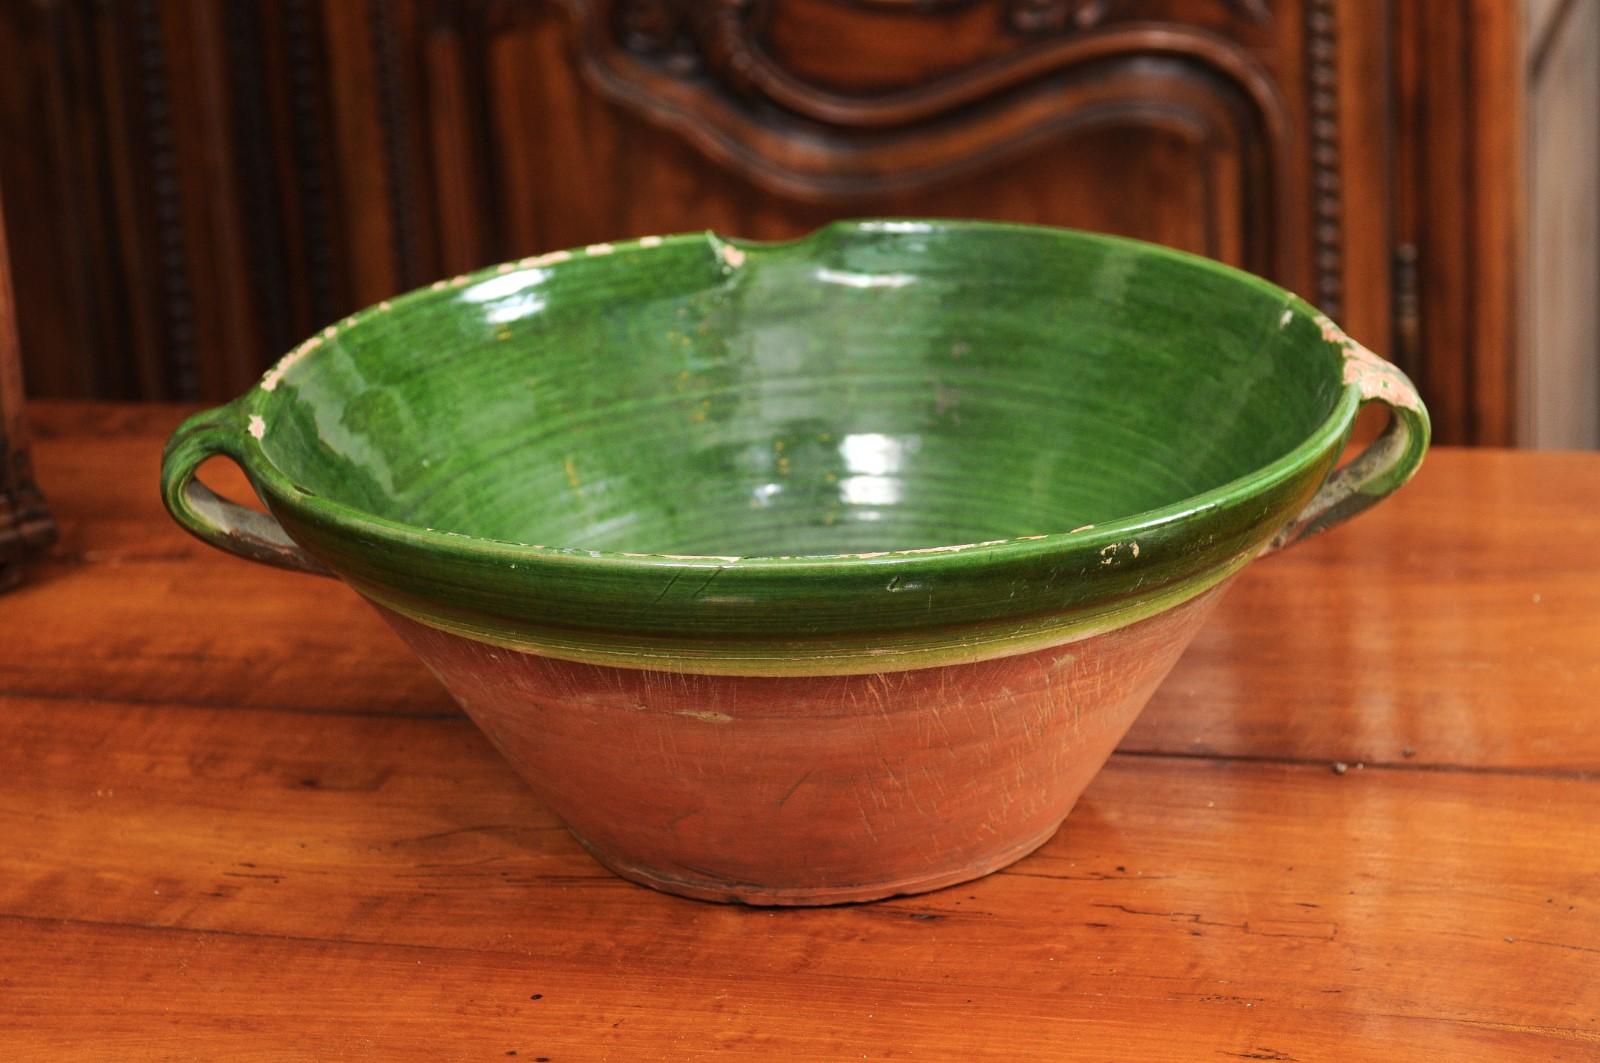 French 1850s Provincial Green Glazed Terracotta Bowl with Handles and Spout In Good Condition For Sale In Atlanta, GA